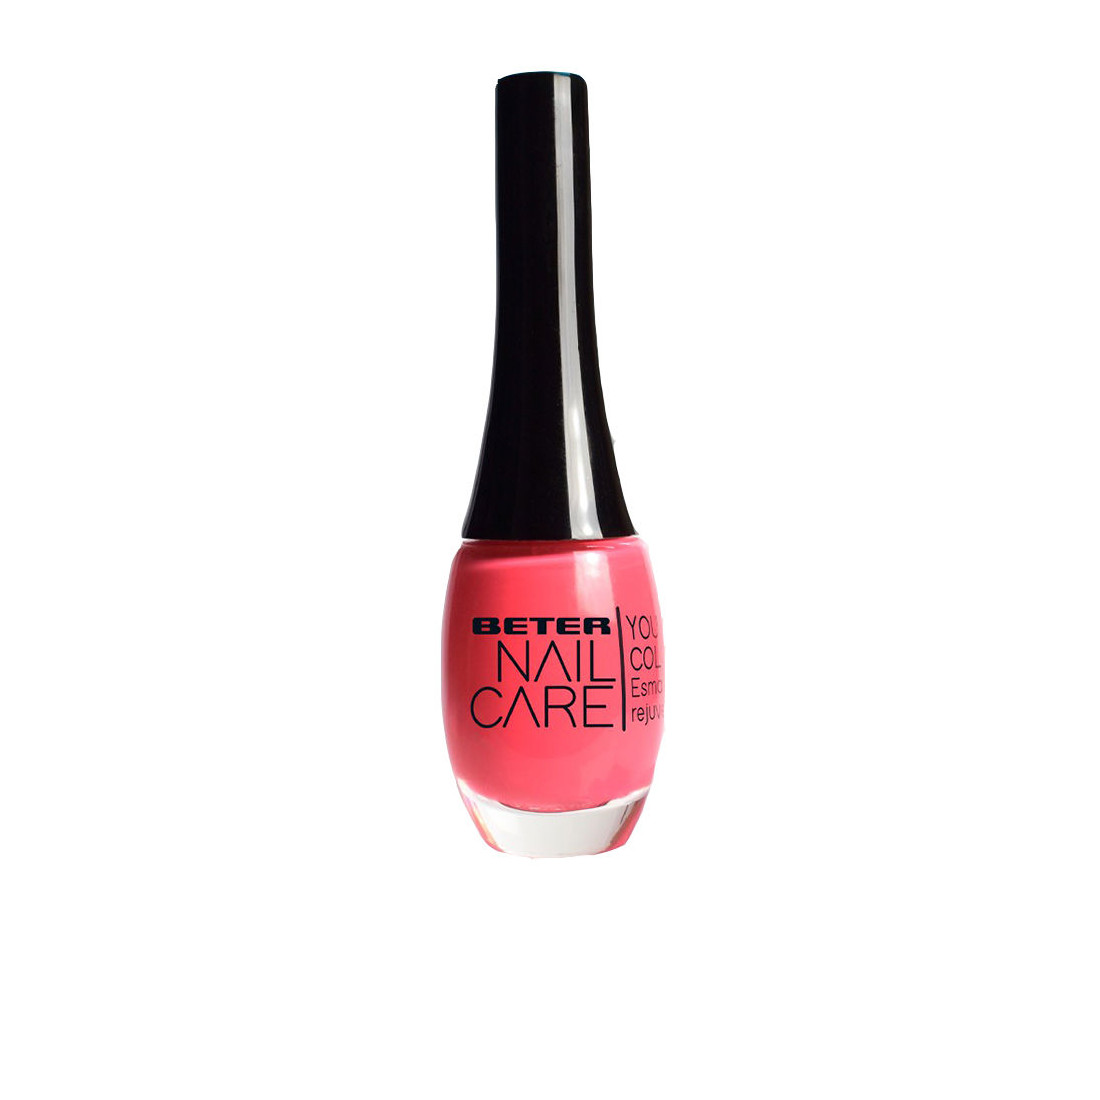 NAIL CARE YOUTH COLOR 242-flor picante 11 ml